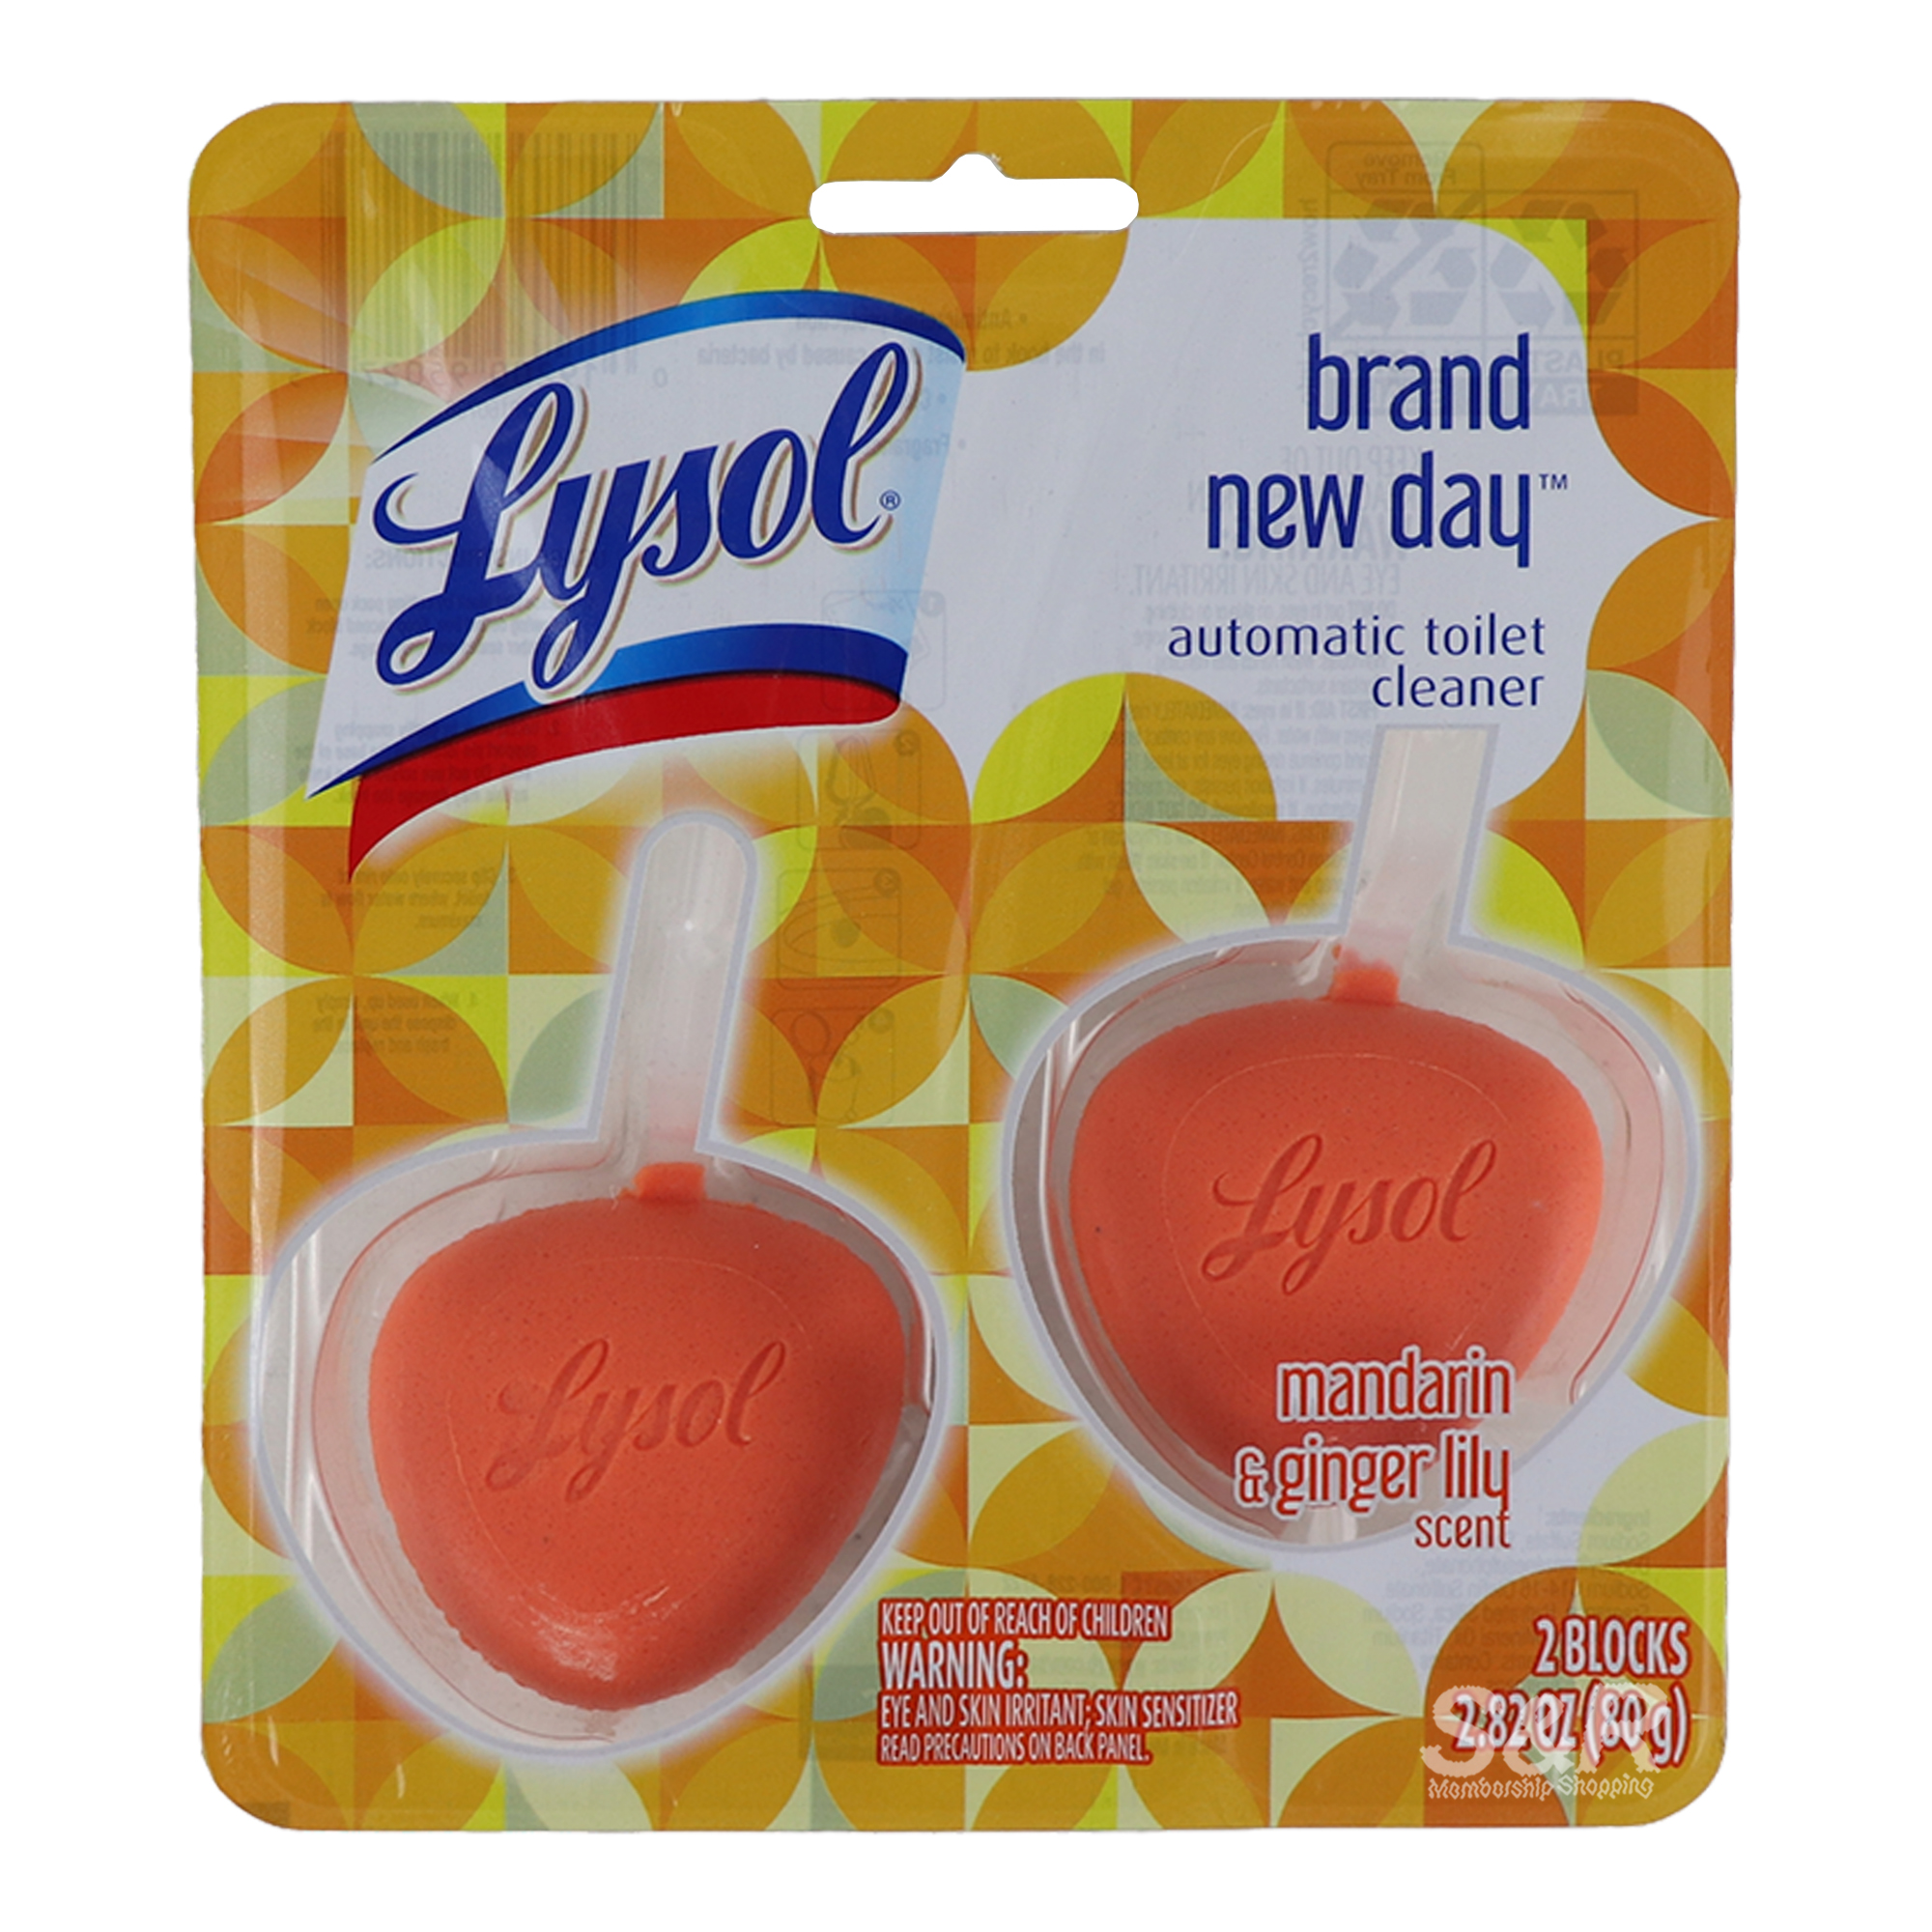 Lysol Automatic Toilet Cleaner Block Mandarin and Ginger Lily Scent 80g